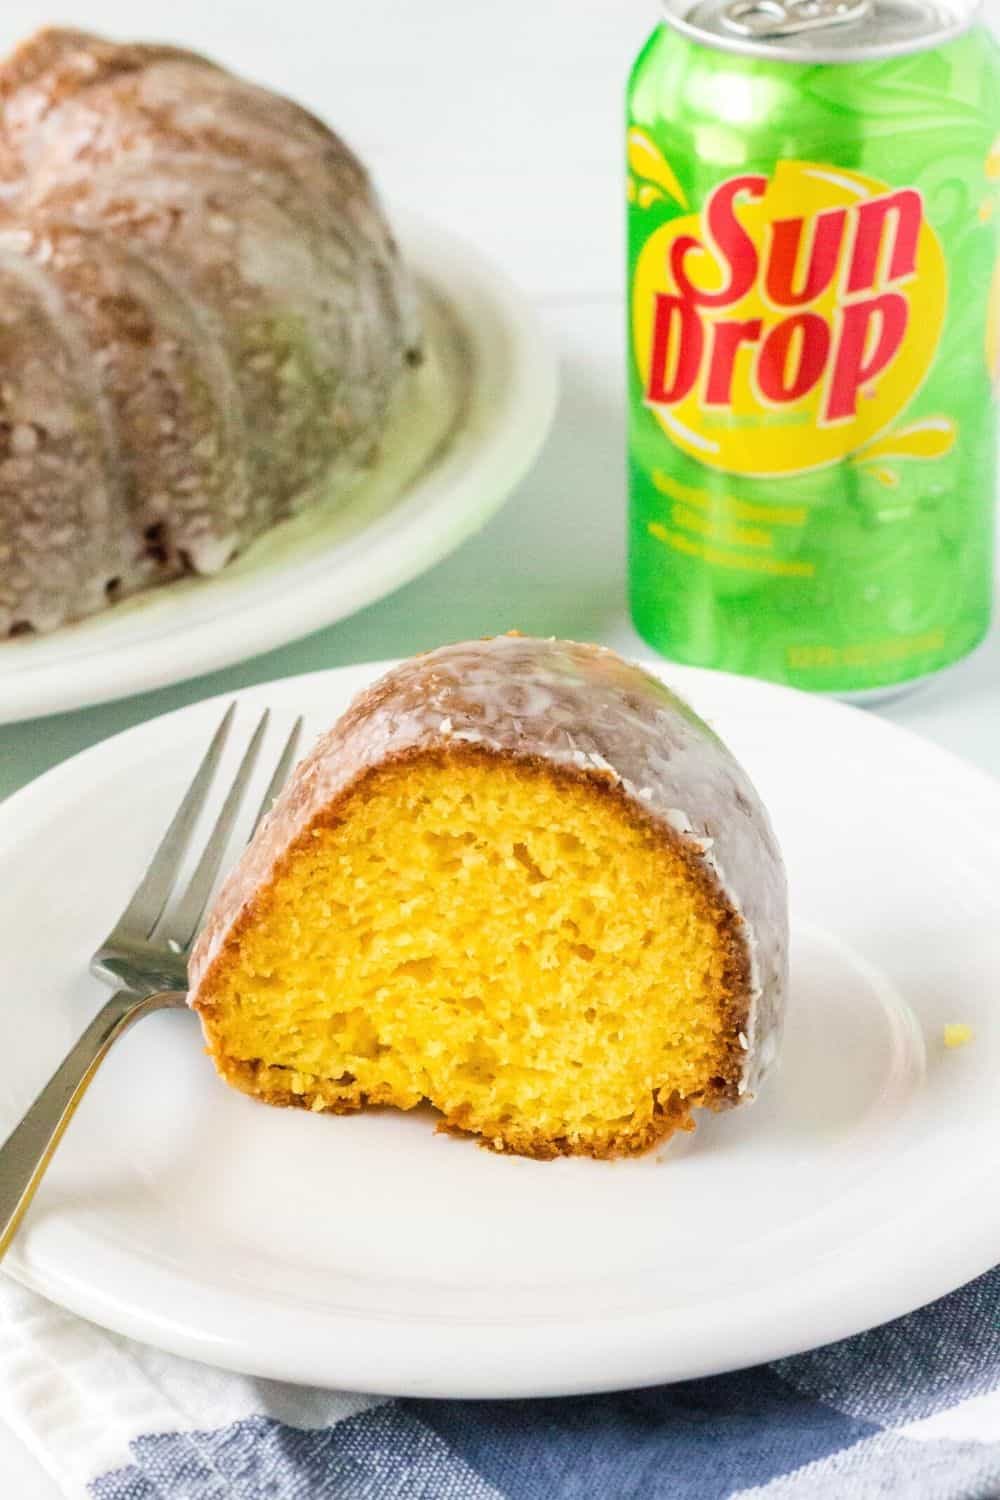 side view of a slice of SunDrop bundt cake served on a white plate with a fork. A can of SunDrop is in the background.